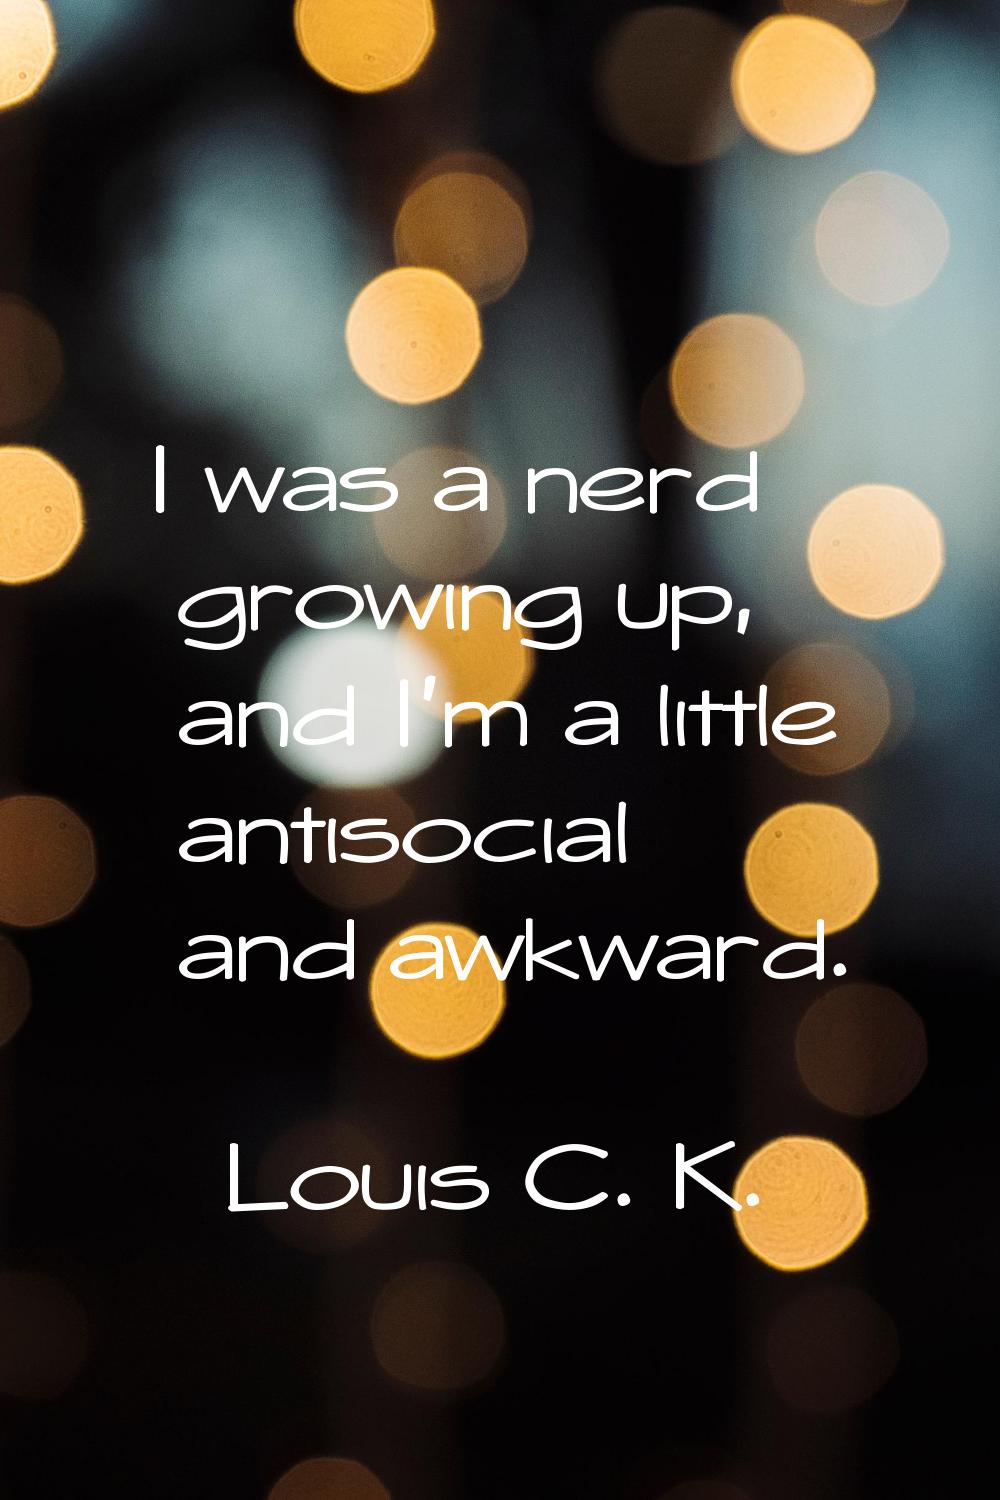 I was a nerd growing up, and I'm a little antisocial and awkward.